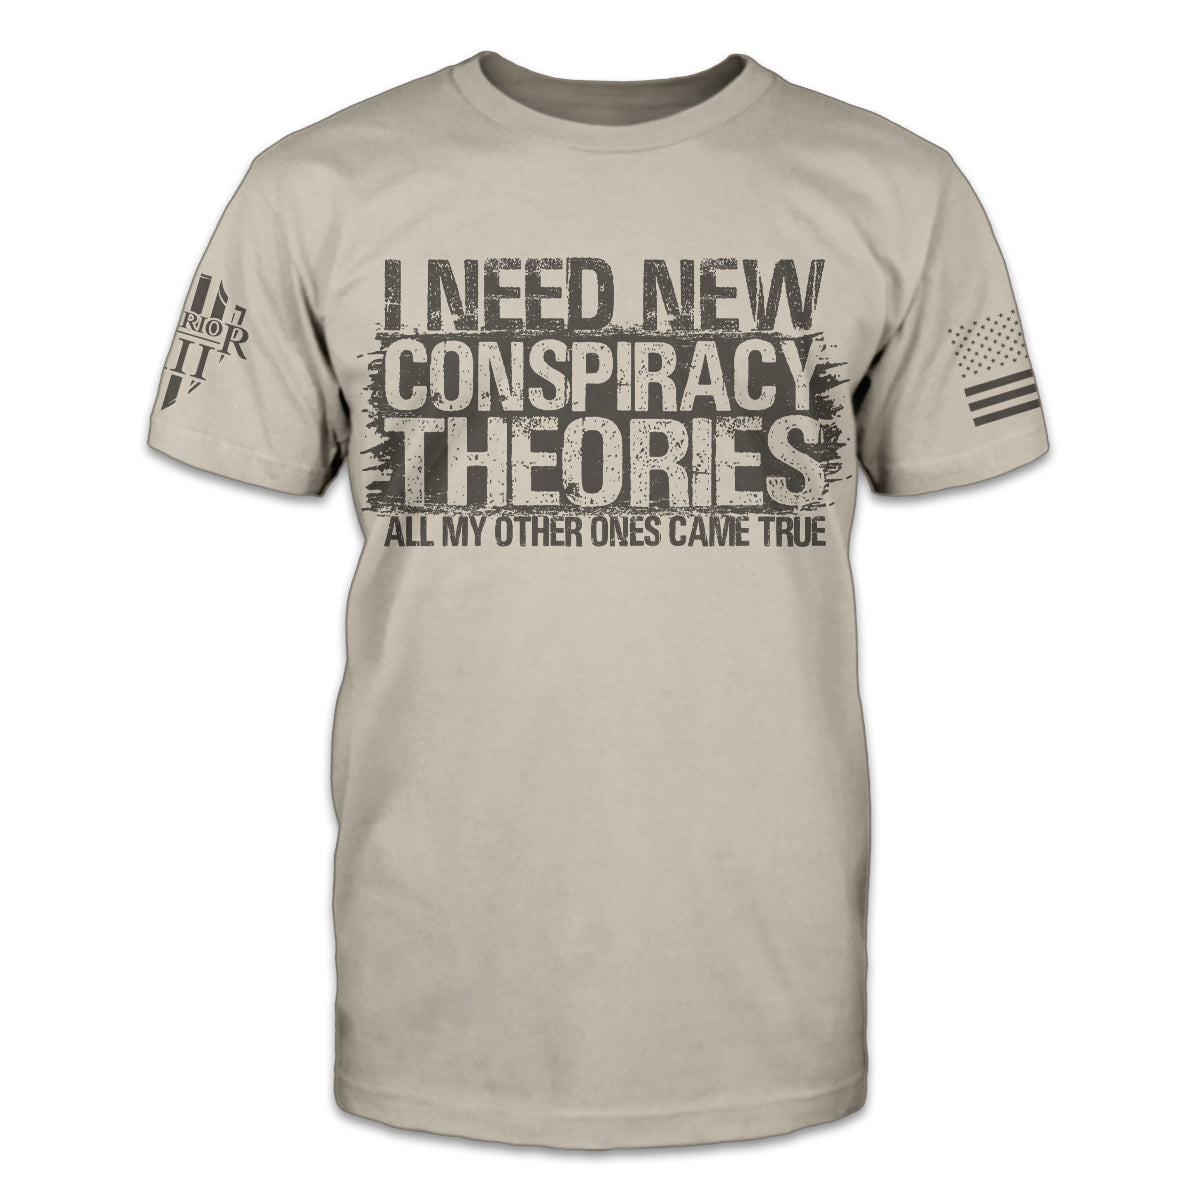 A light tan t-shirt with the words 'I need new conspiracy theories, all my other ones came true" printed on the front of the shirt.